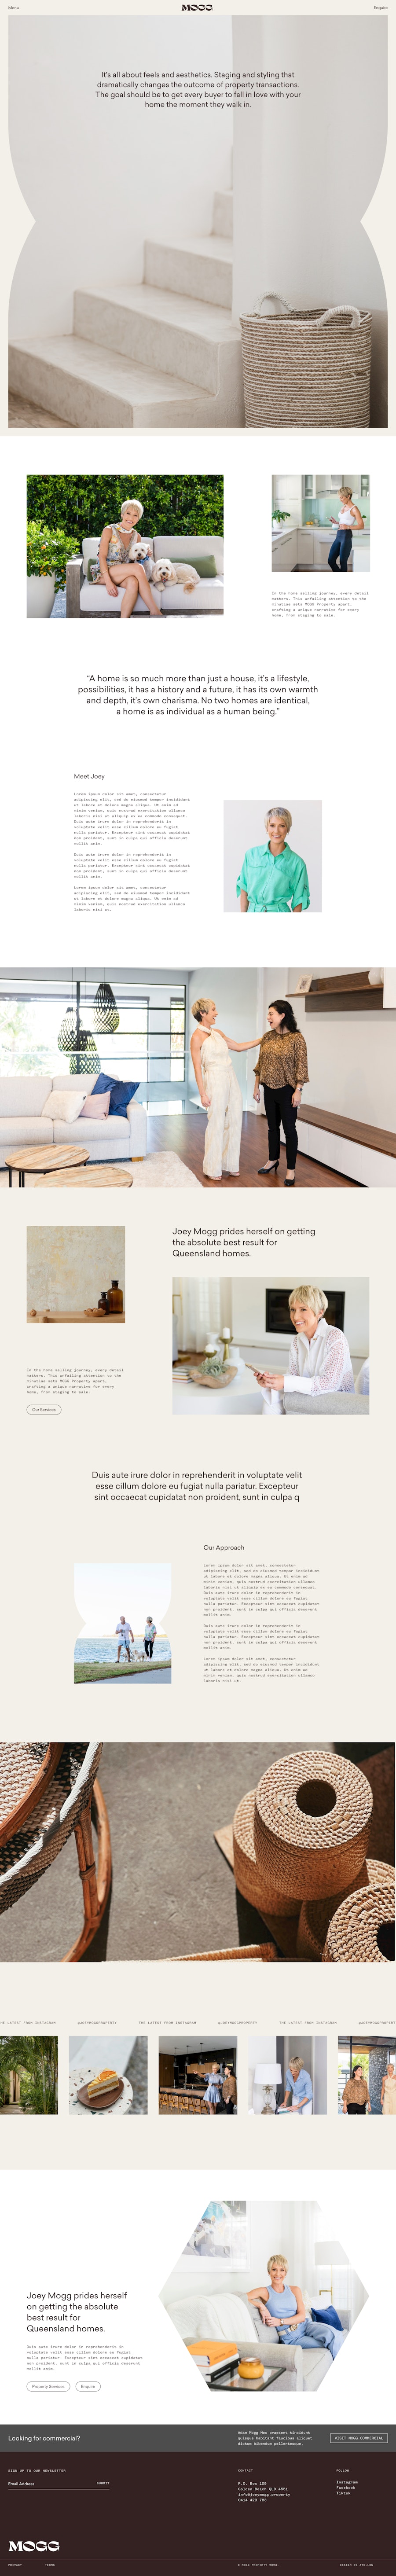 Mogg Property About Page  Design by Atollon